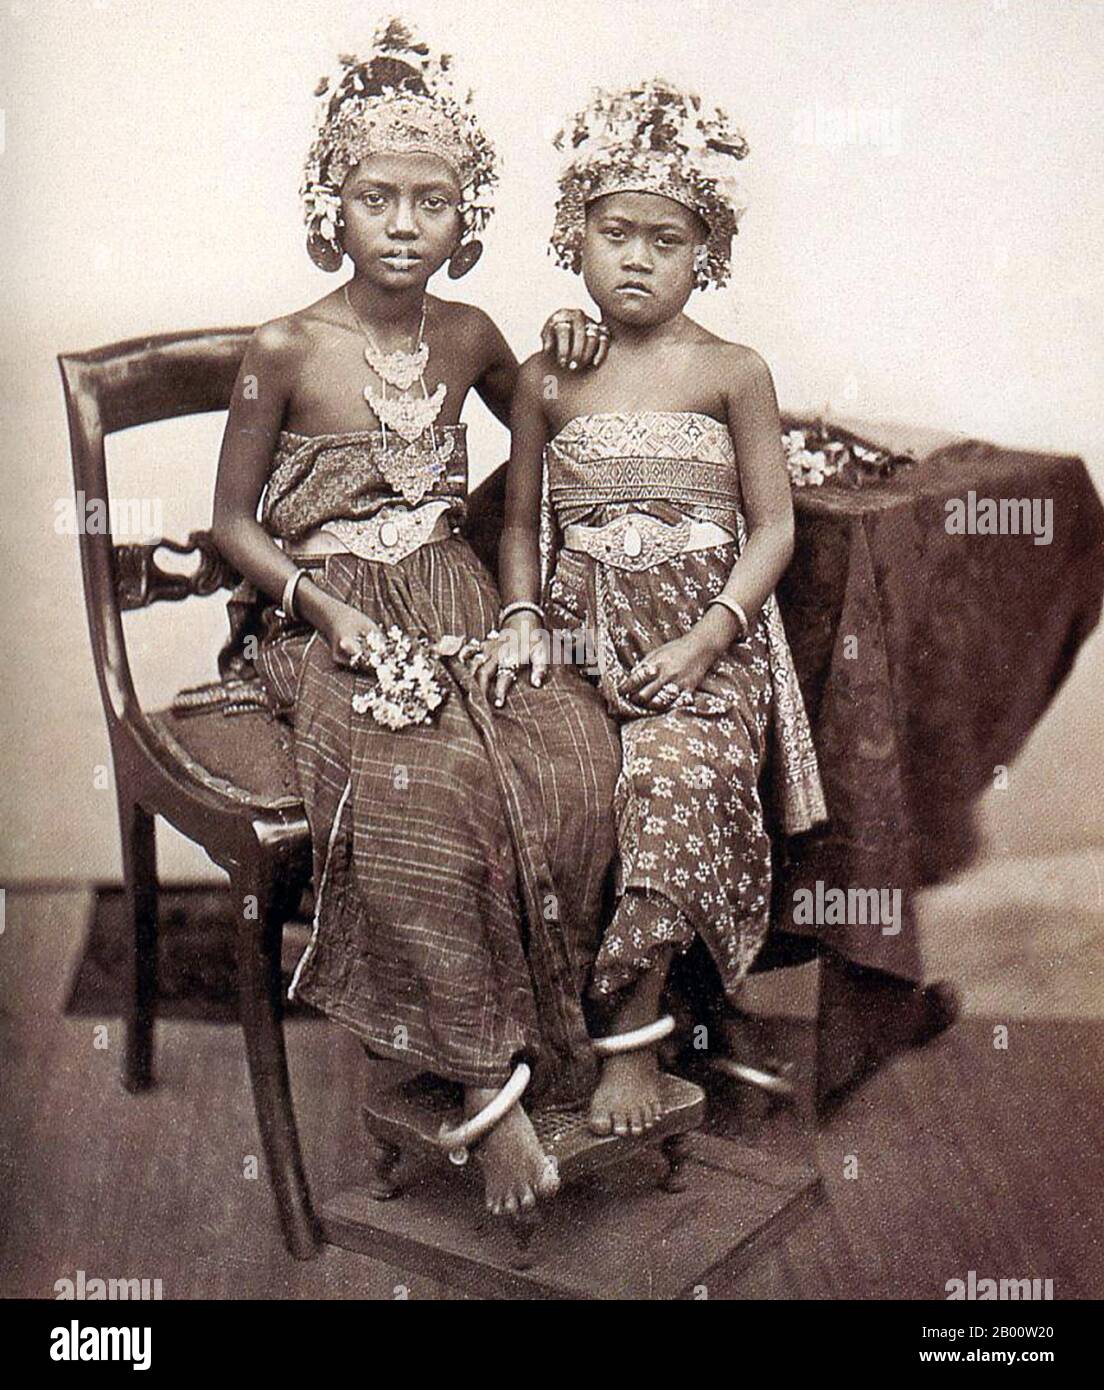 Indonesia: Two Balinese princesses in royal regalia, c. 1900.  Bali is home to most of Indonesia's small Hindu minority with some 92% of the island’s 4 million population adhering to Balinese Hinduism, while most of the remainder follow Islam.  Bali is the largest tourist destination in Indonesia, and is renowned for its highly developed arts, including traditional and modern dance, sculpture, painting, leatherwork, metalwork and music. Stock Photo